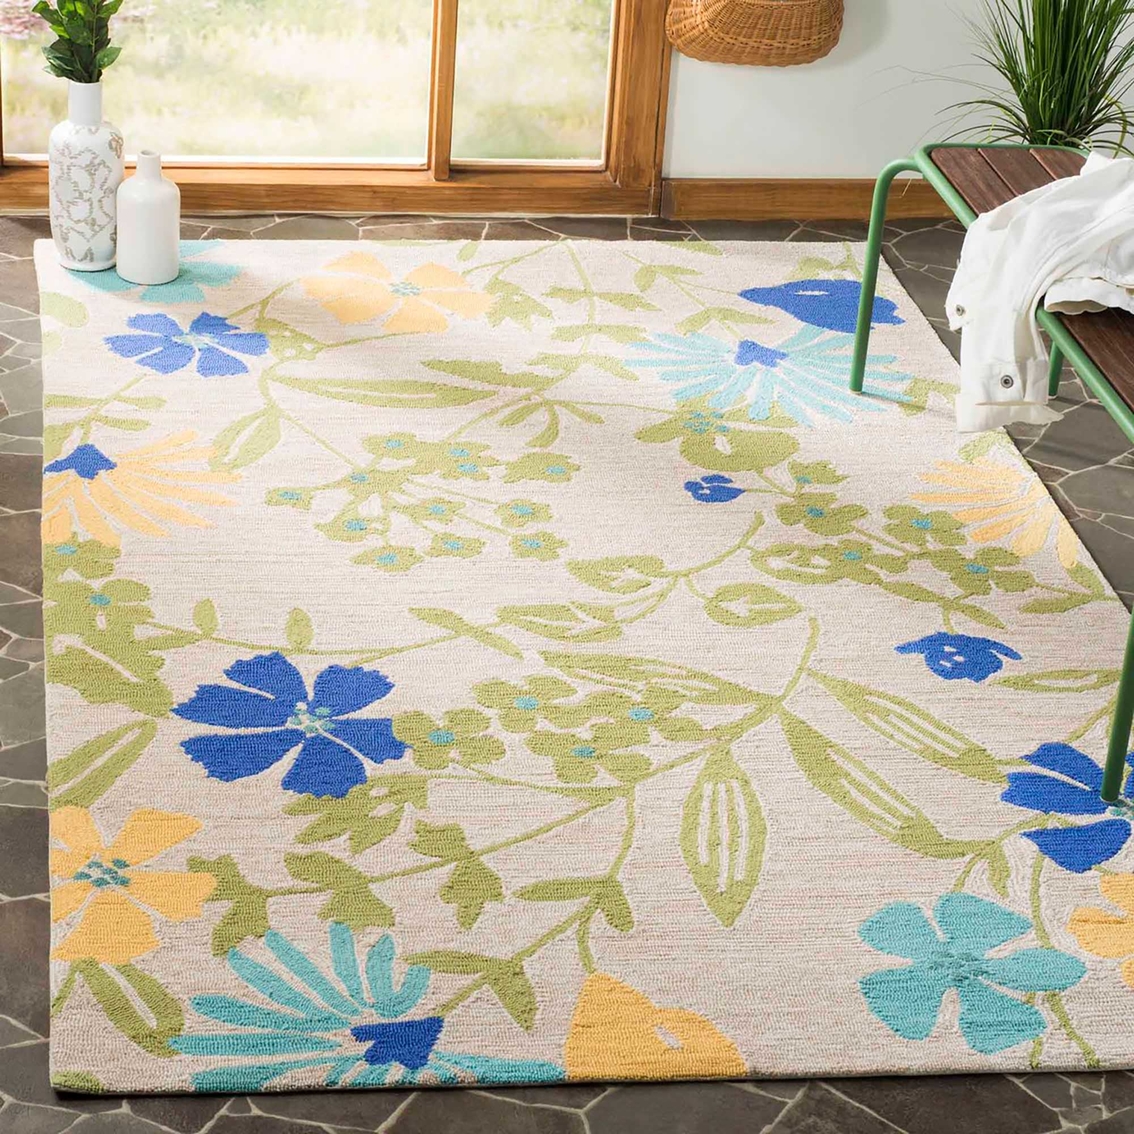 Martha Stewart Collection Meadow Floral Area Rug - Image 4 of 4